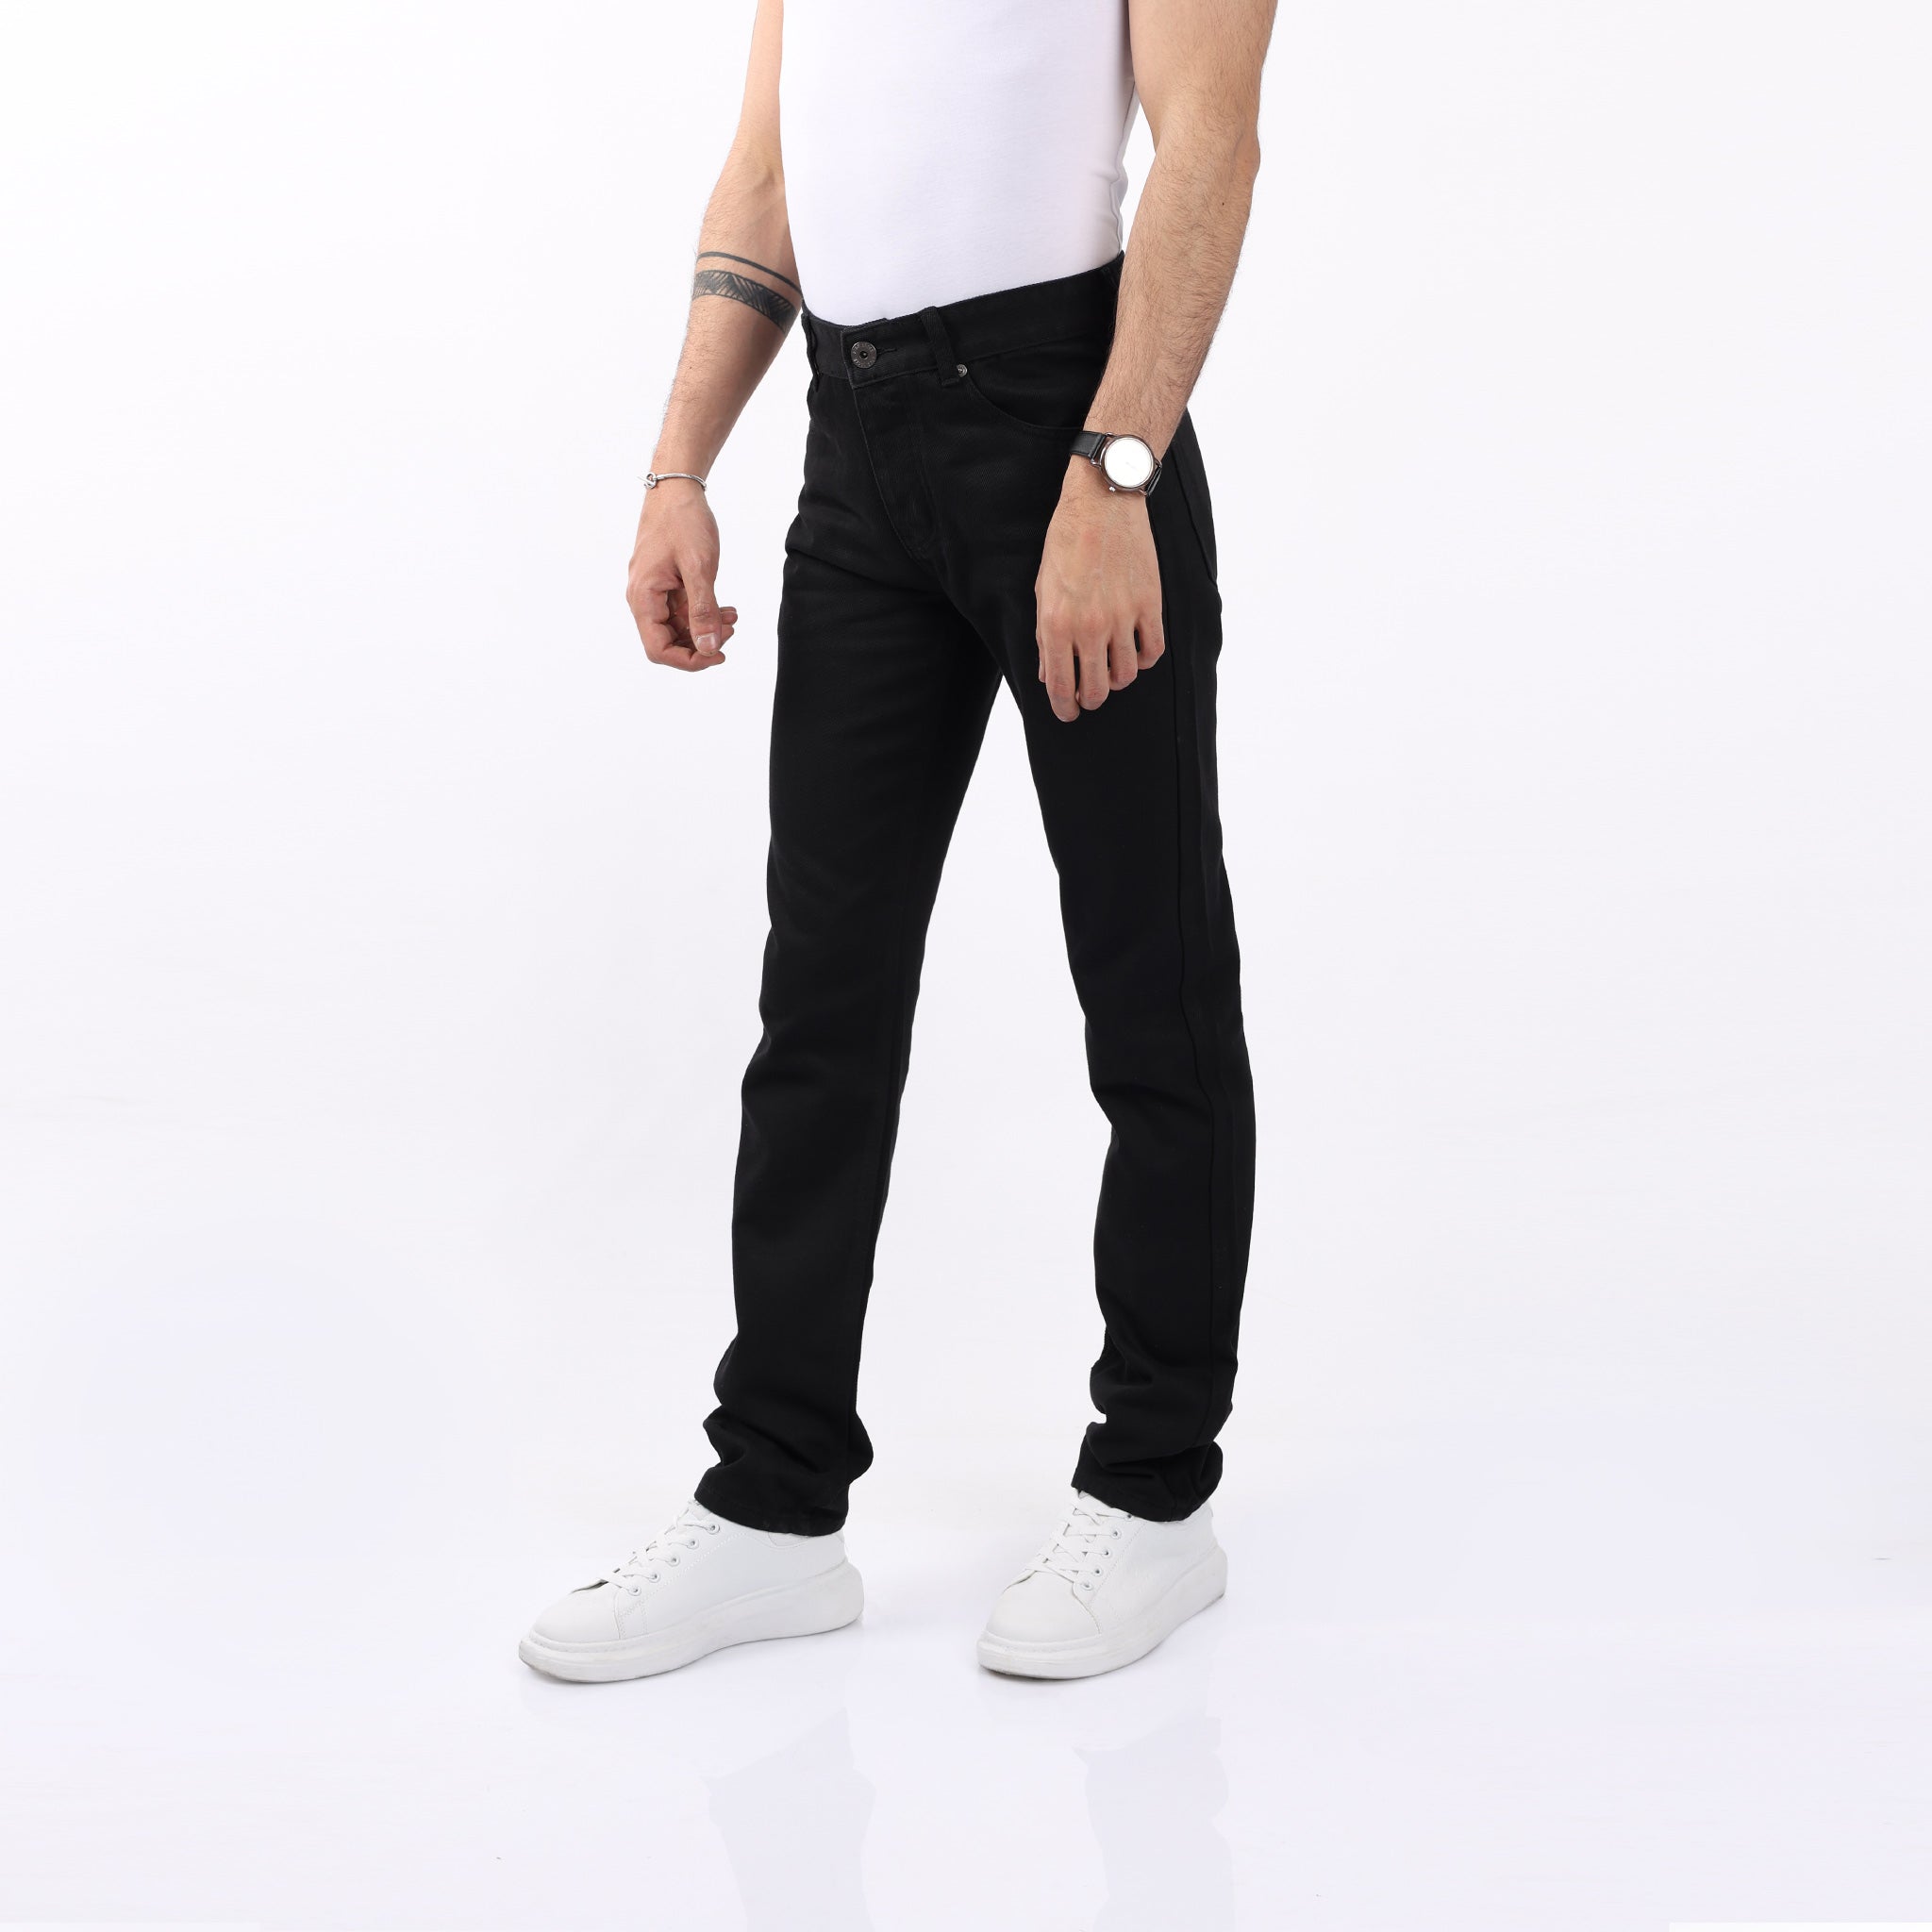 Straight Fit Jeans Pants